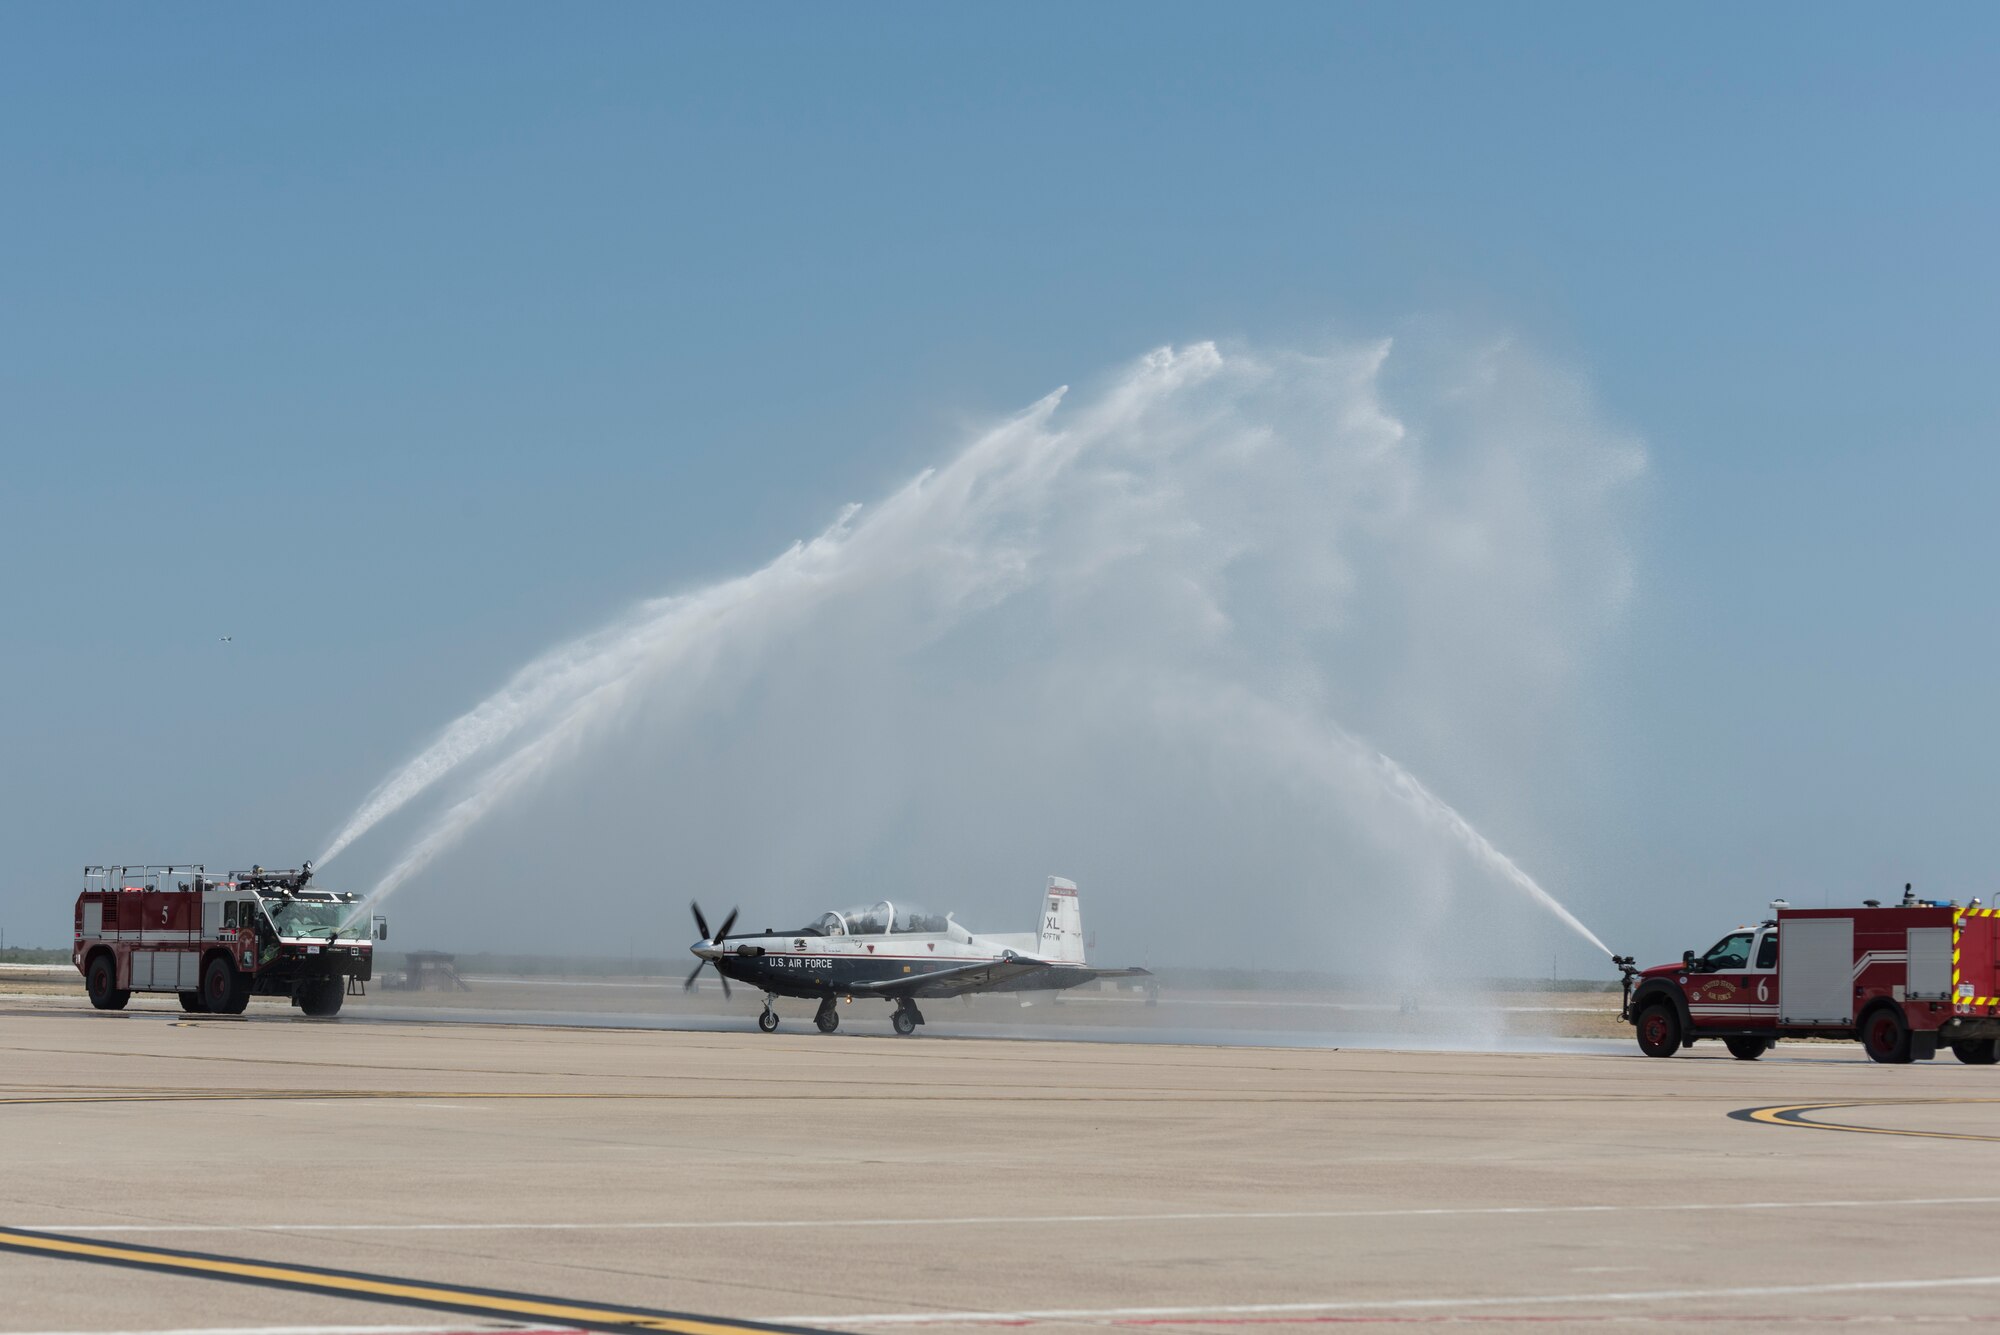 Col. Lee Gentile, 47th Flying Training Wing commander, ends his fini flight by taxiing under the arch of water, July 17, 2020 at Laughlin Air Force Base Texas. He parked in front of the base operations building where he was greeted by family, friends and co-workers to celebrate his last flight as an Air Force officer. (U.S. Air Force photo by Senior Airman Anne McCready)